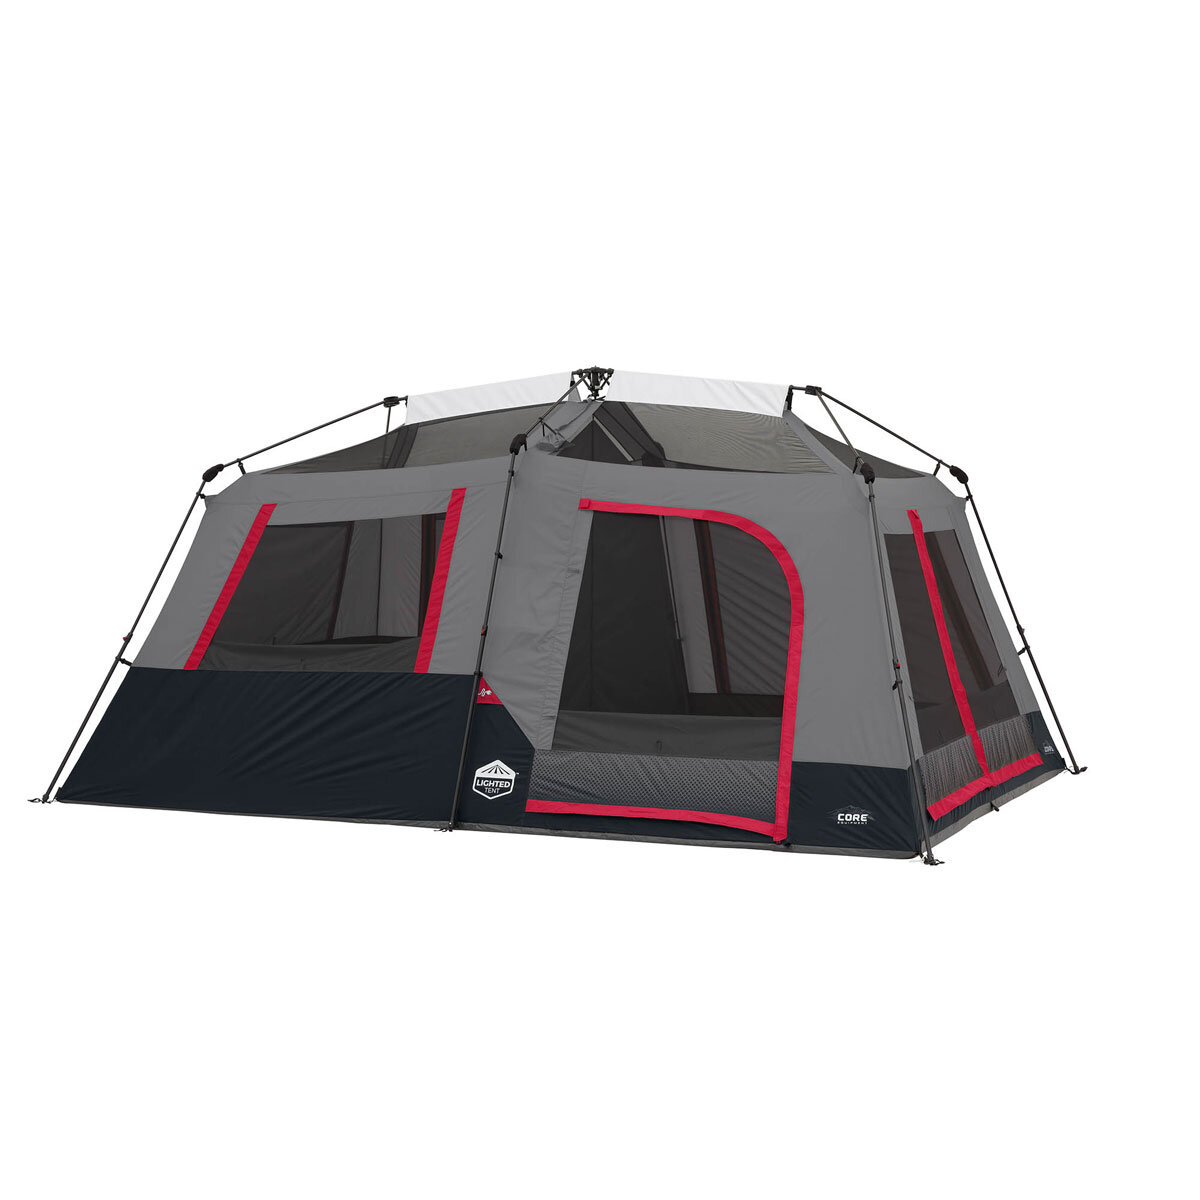 CORE LED Lighted Instant Cabin Tent, 10 Person